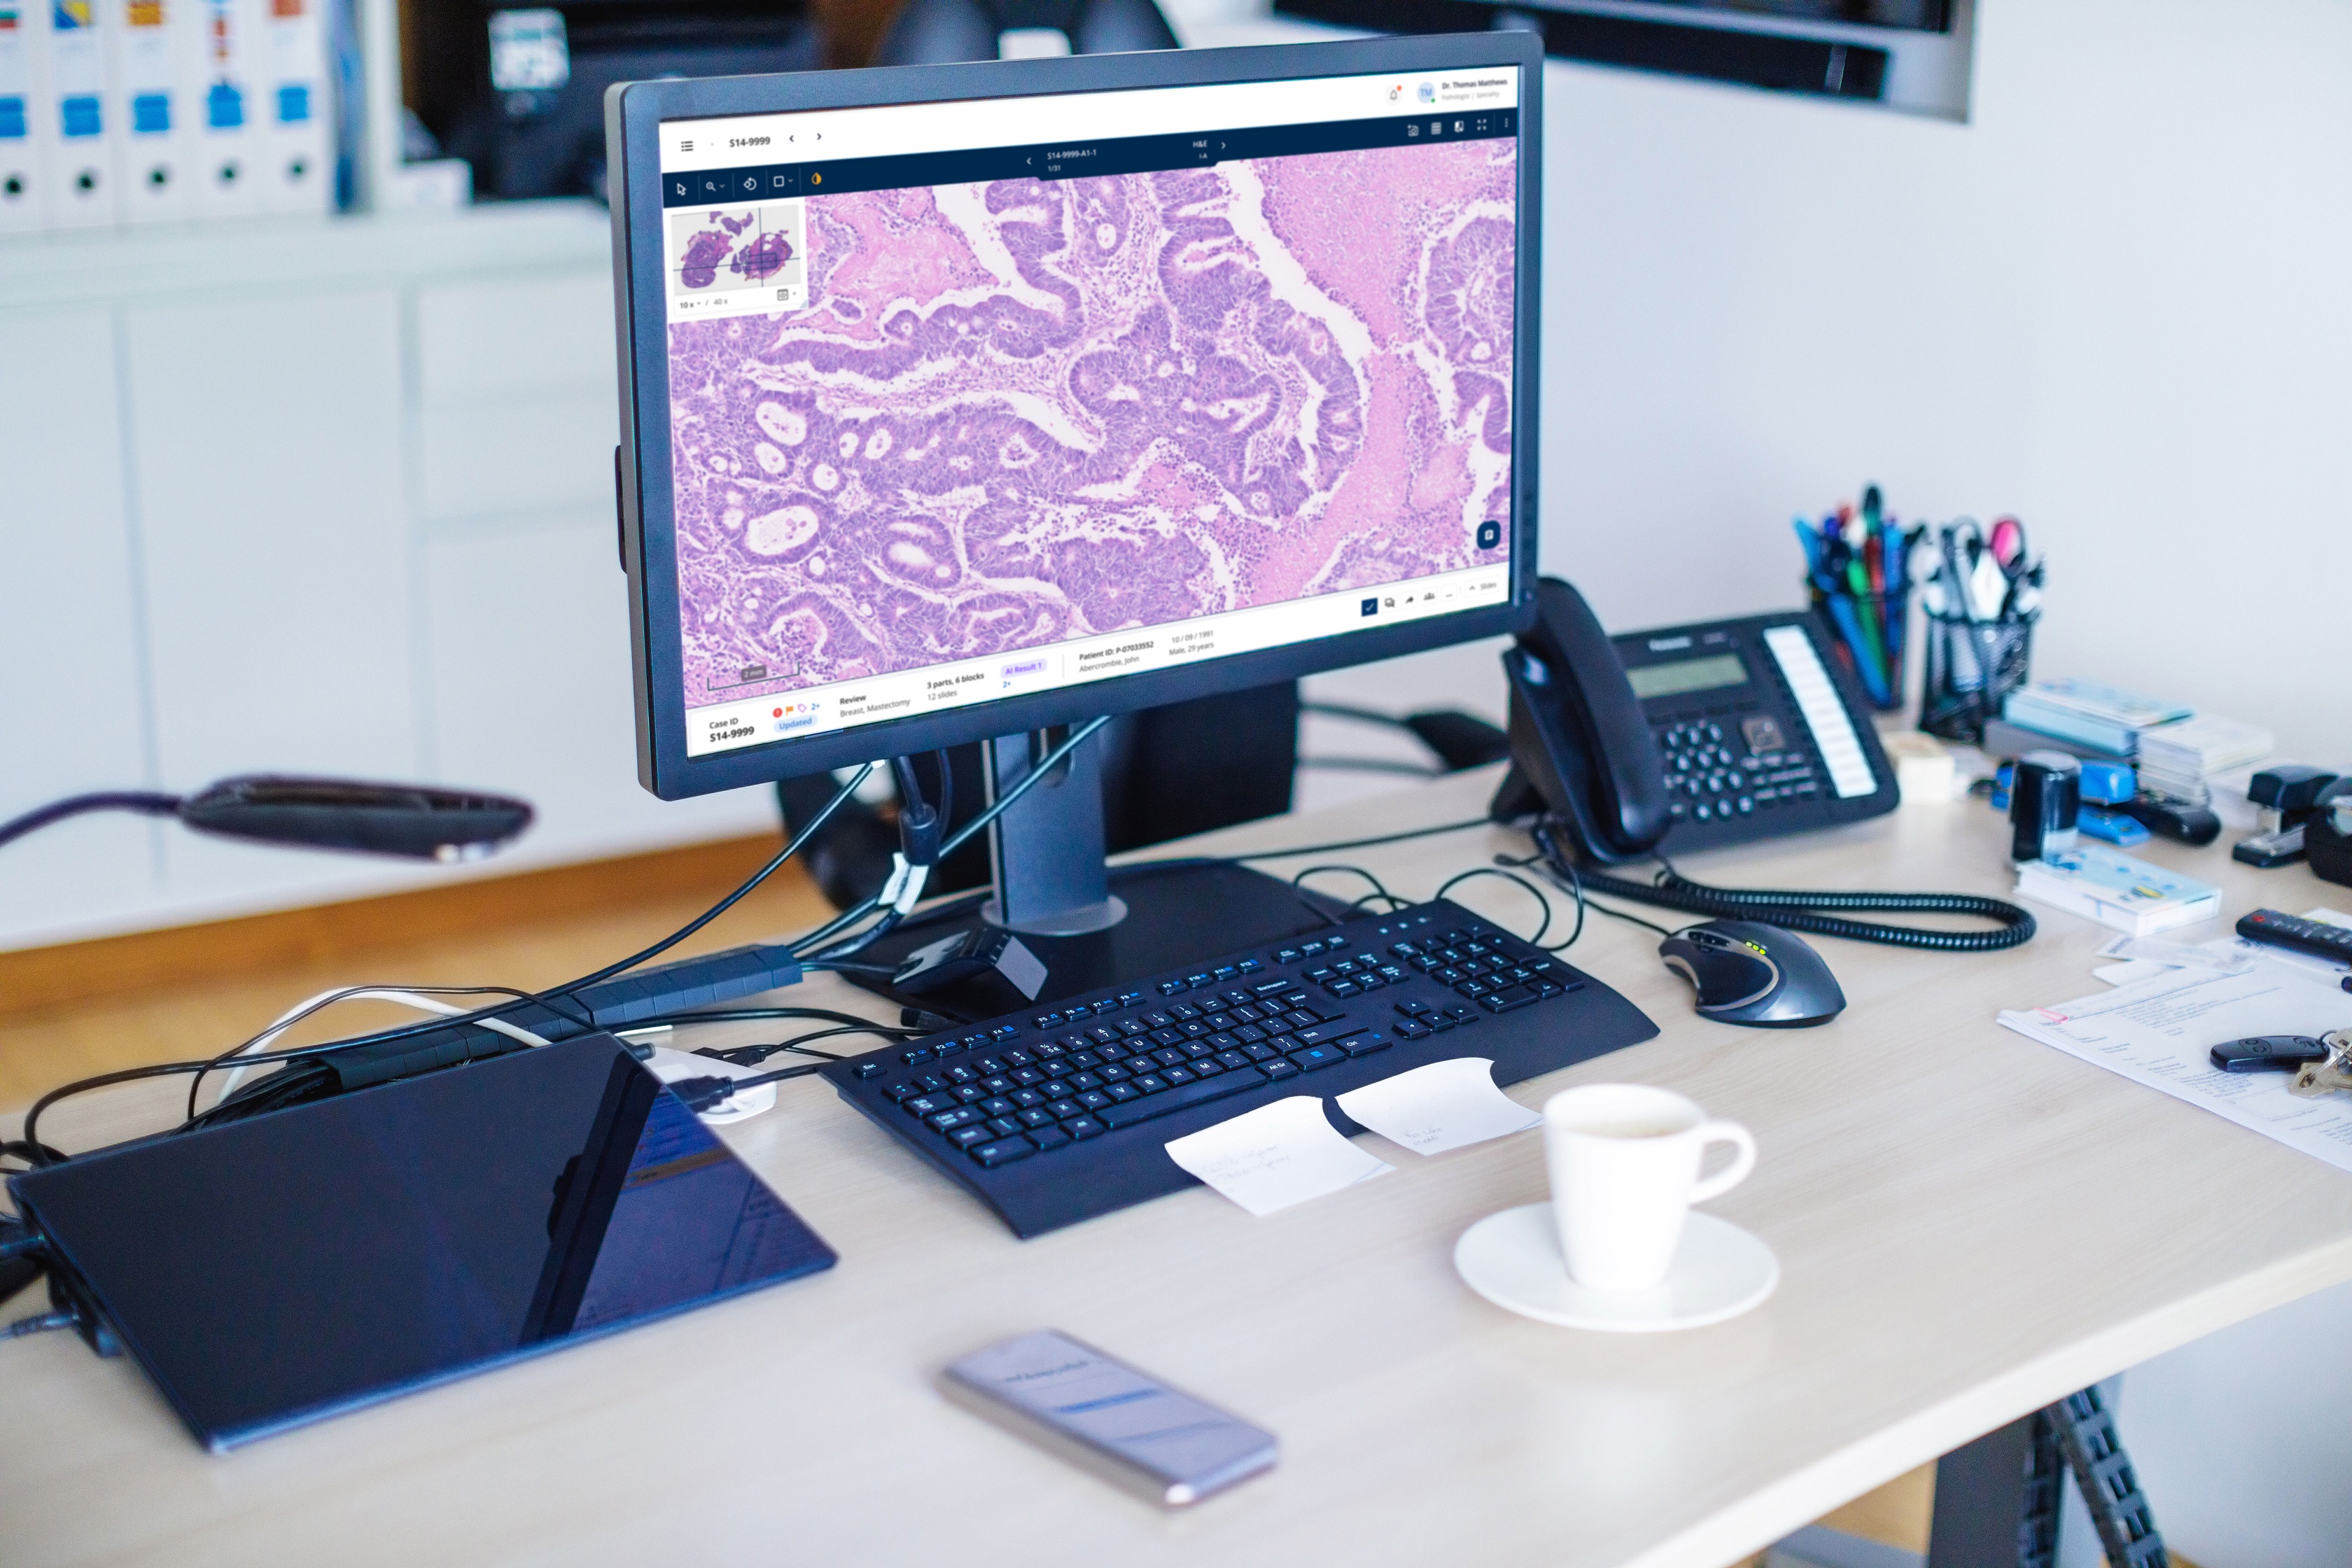 Spectrum Healthcare Partners is adopting Proscia's modern digital pathology platform to increase access to high-quality diagnostic services.